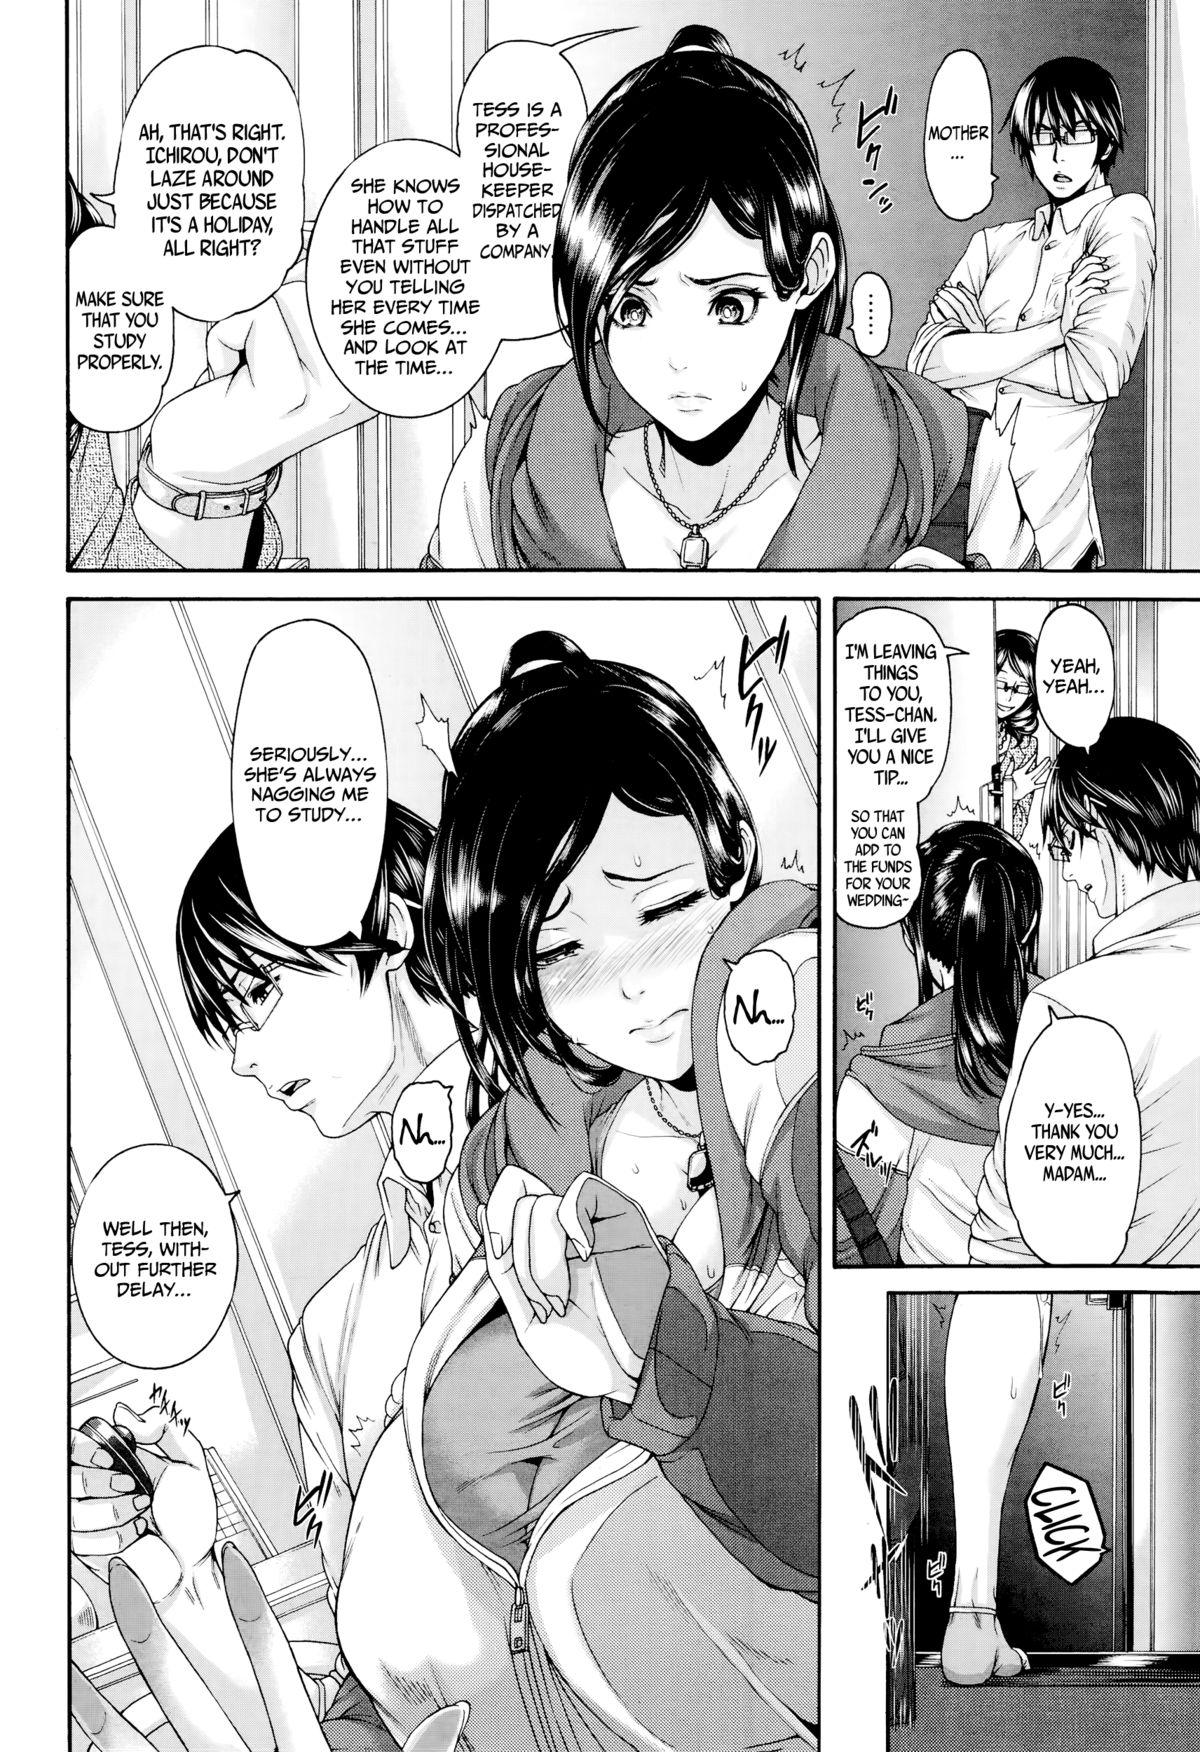 Chichona Onaho Keeper Softcore - Page 2